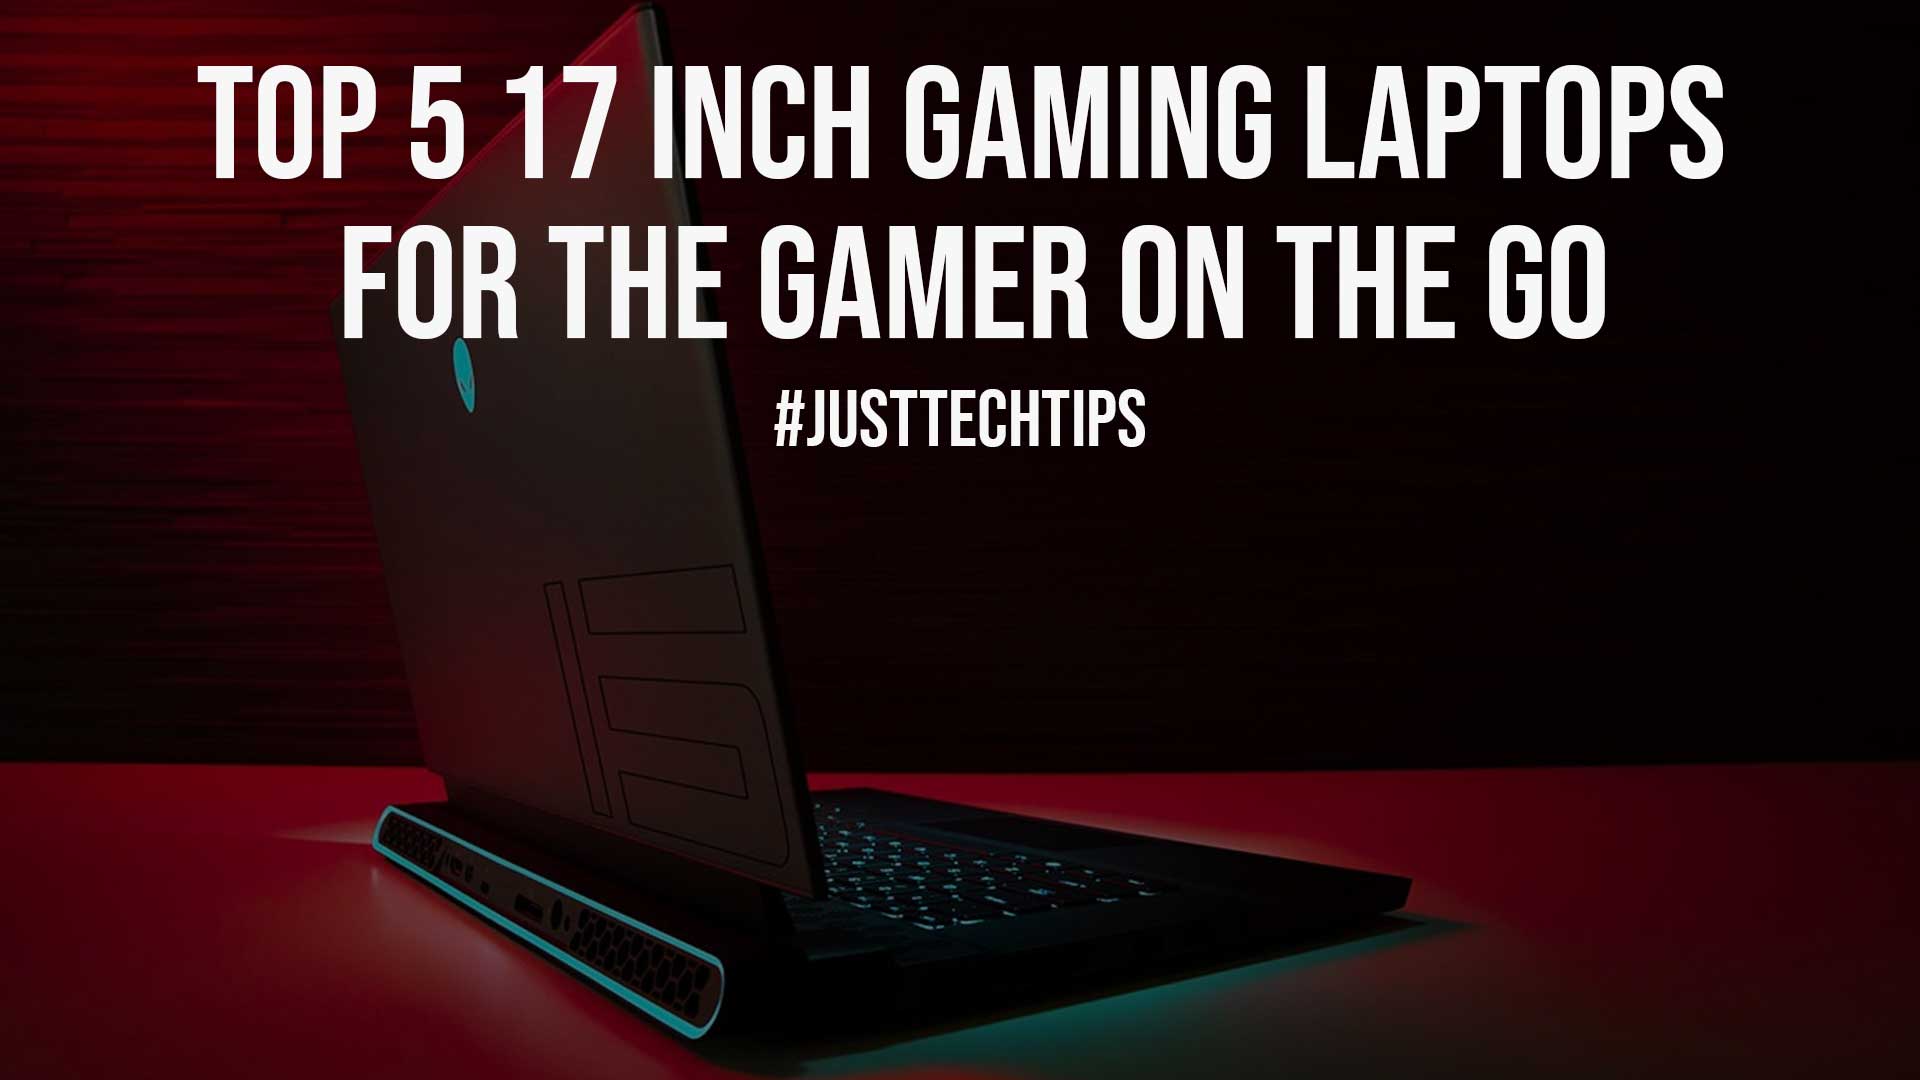 Top 5 17 inch Gaming Laptops For The Gamer On The Go